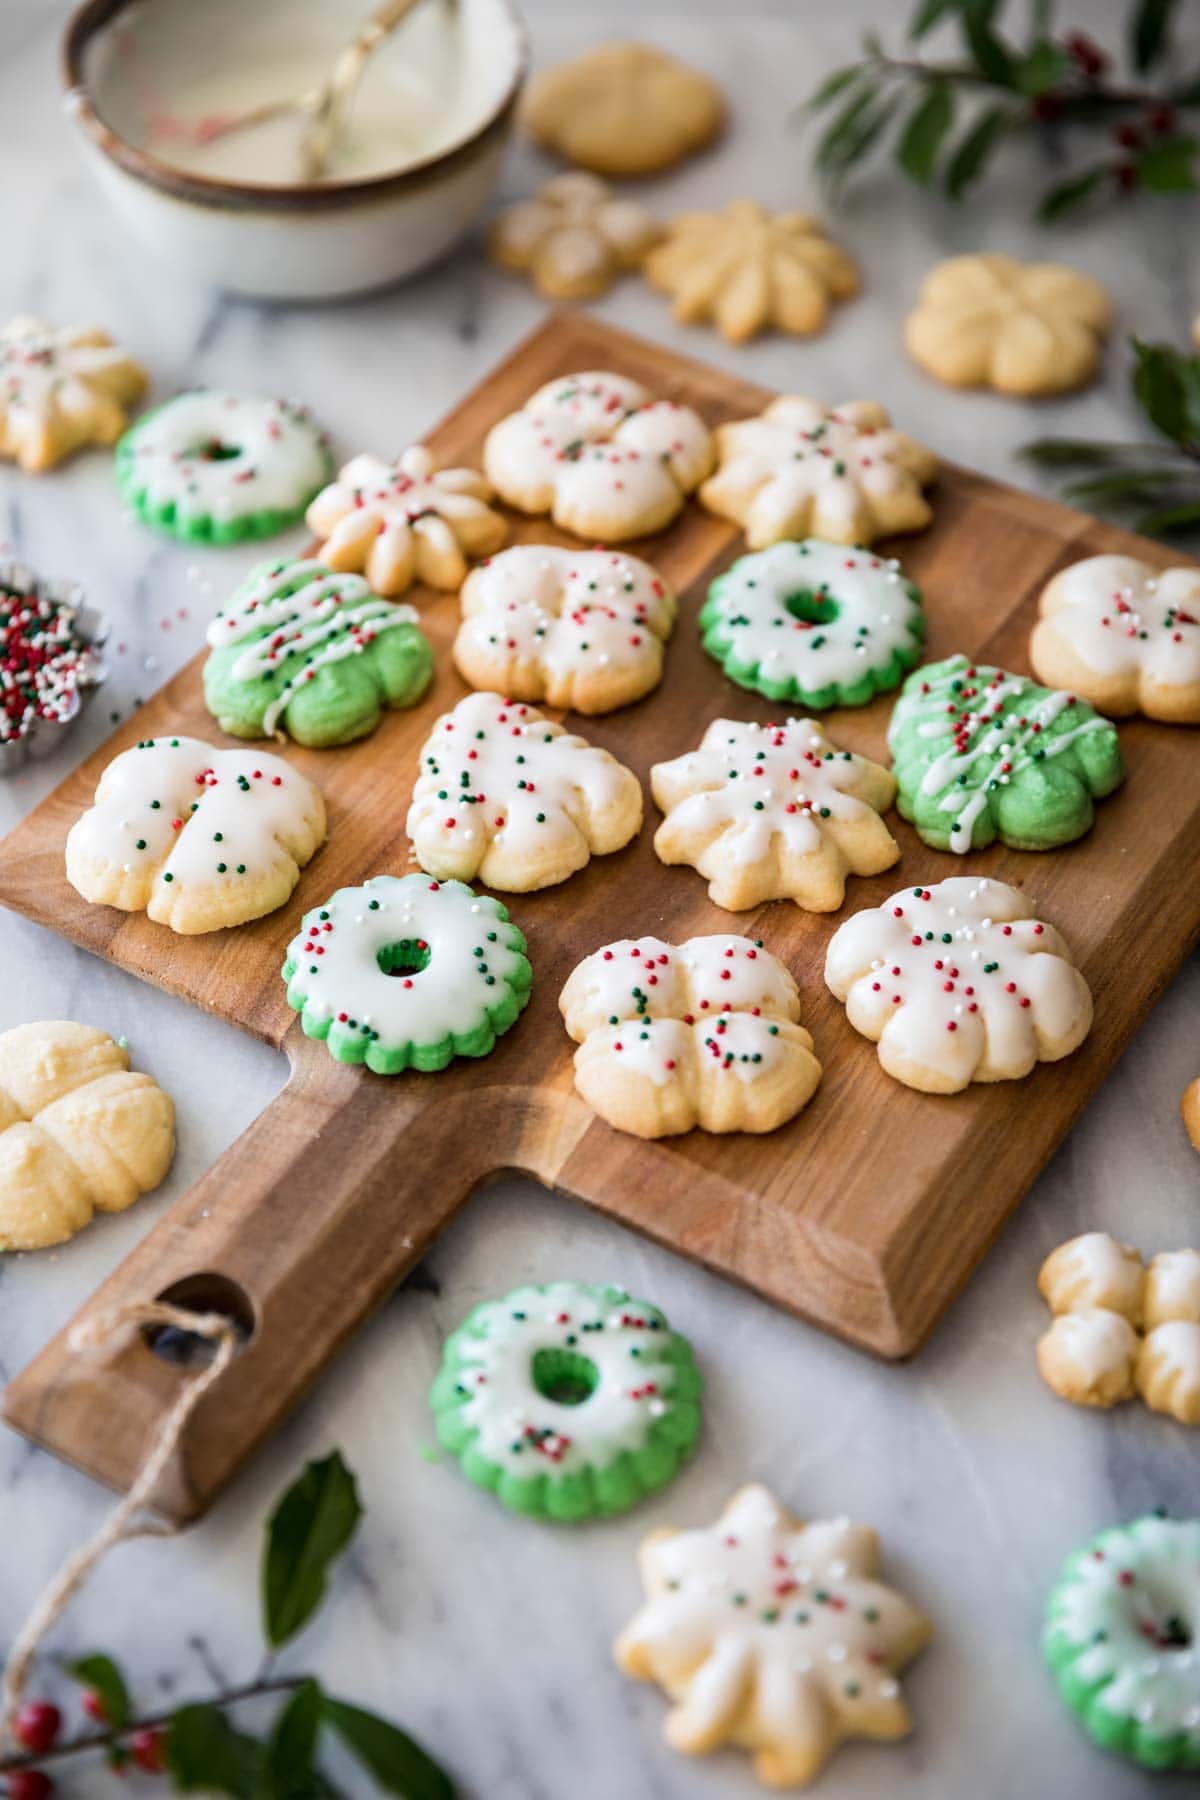 Colorful and festive spritz cookies shaped like wreaths, trees, and snowflakes on a wood cutting board.